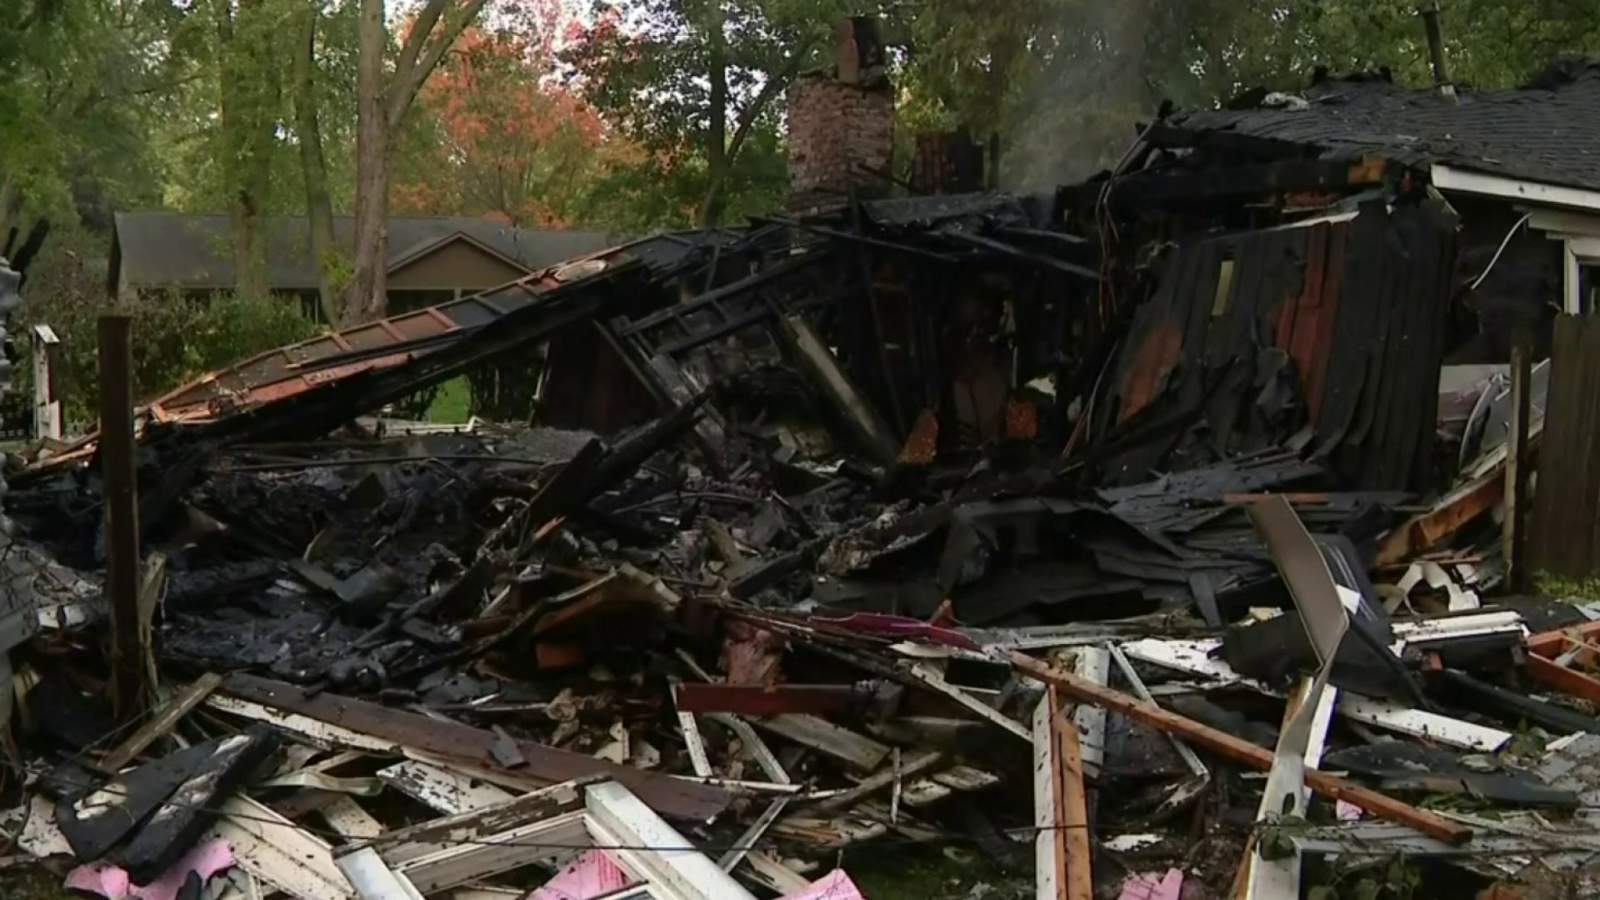 Hear from Oakland County neighbors who witnessed house explosion possibly caused by drug operation